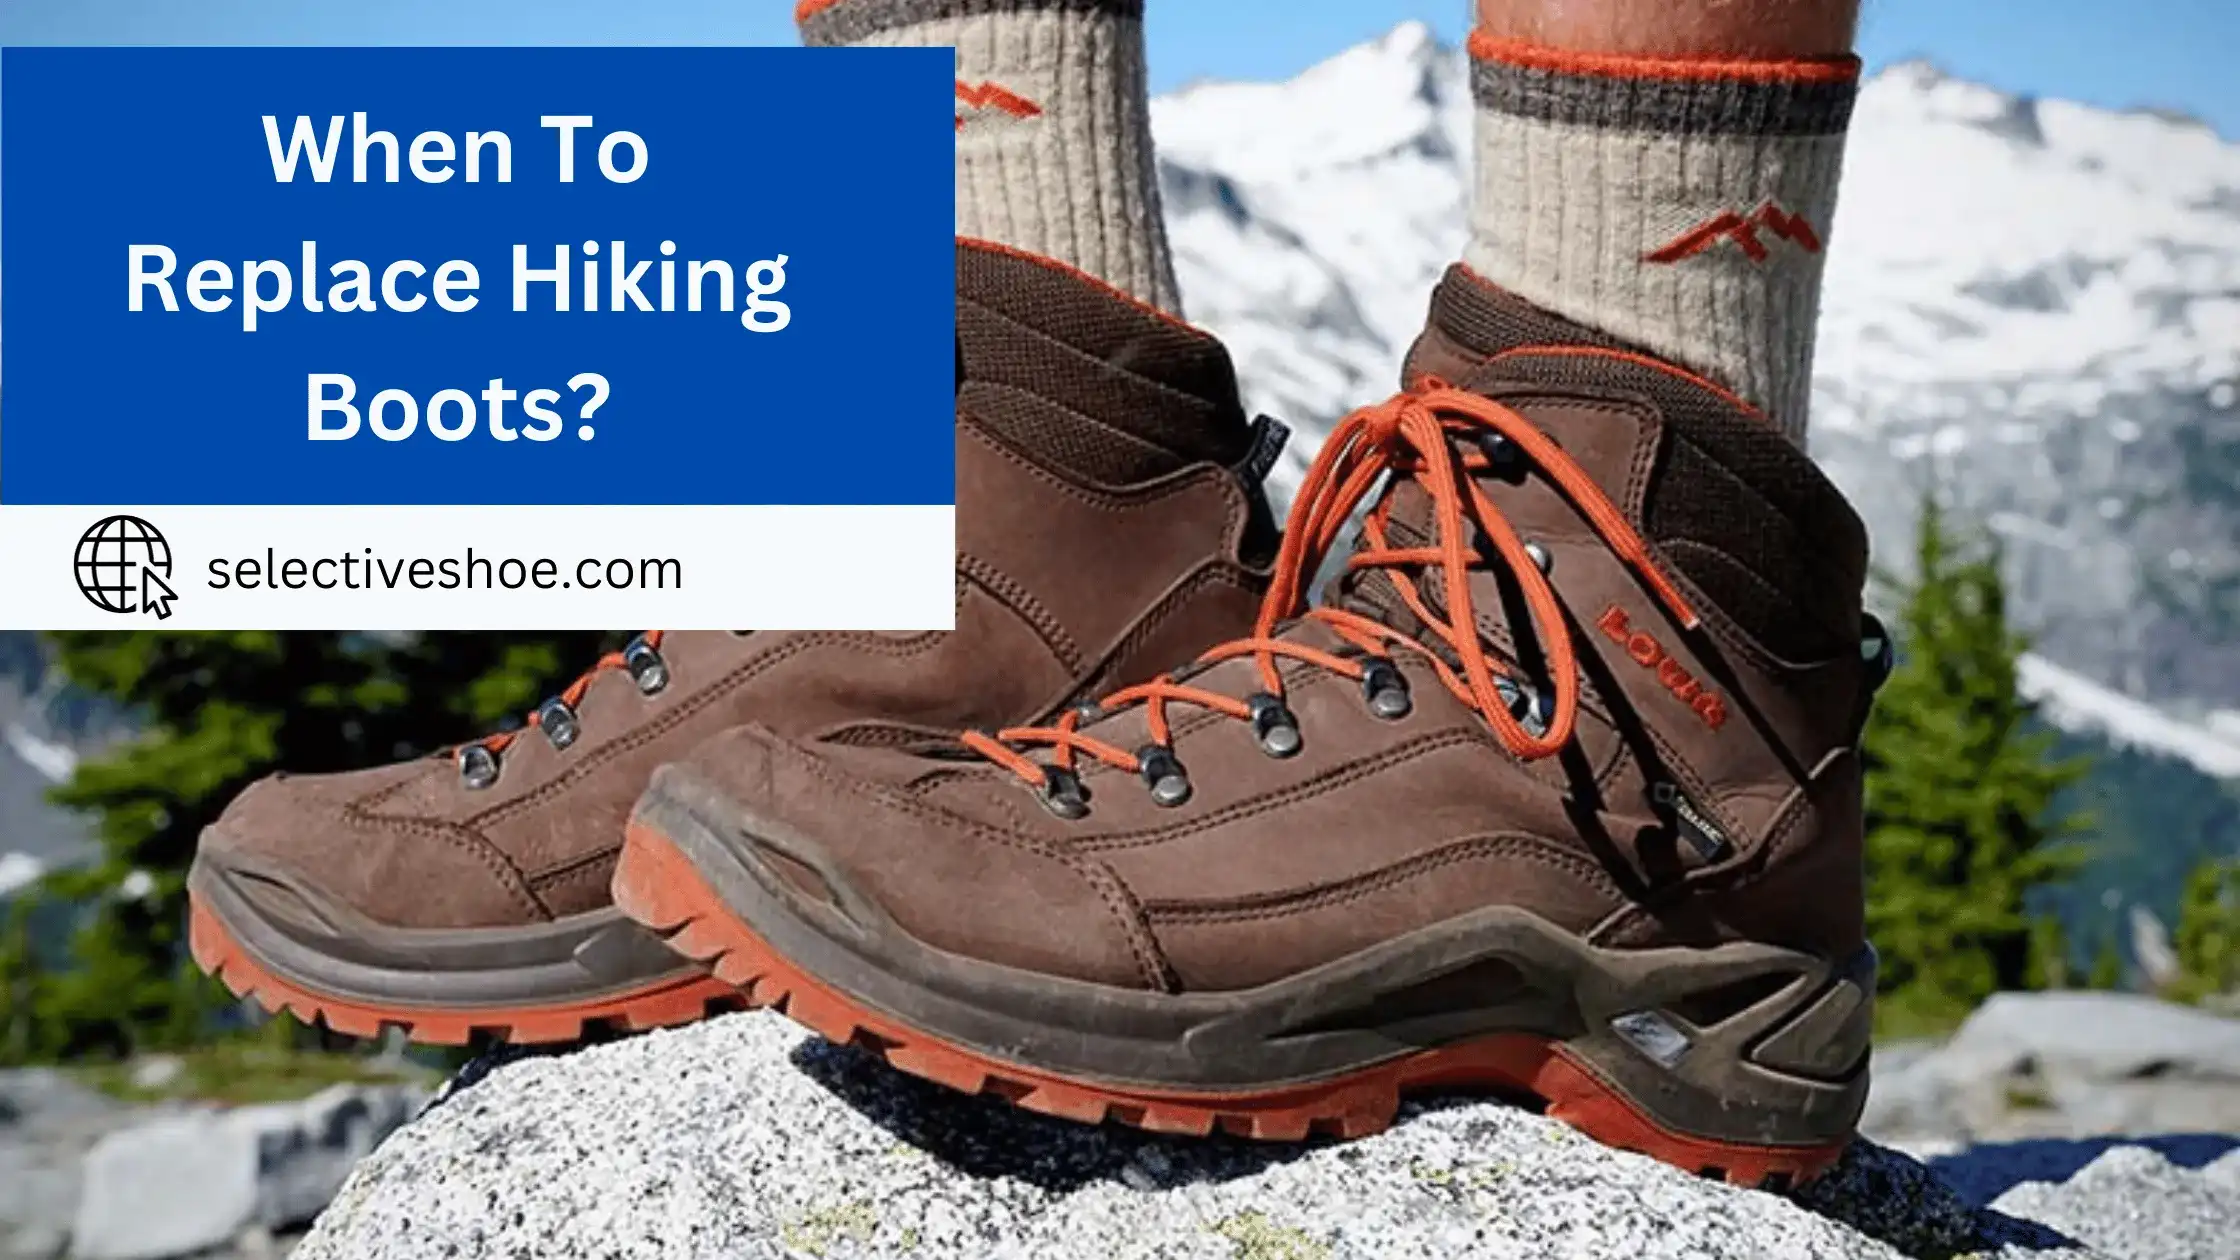 When To Replace Hiking Boots? Detailed Information